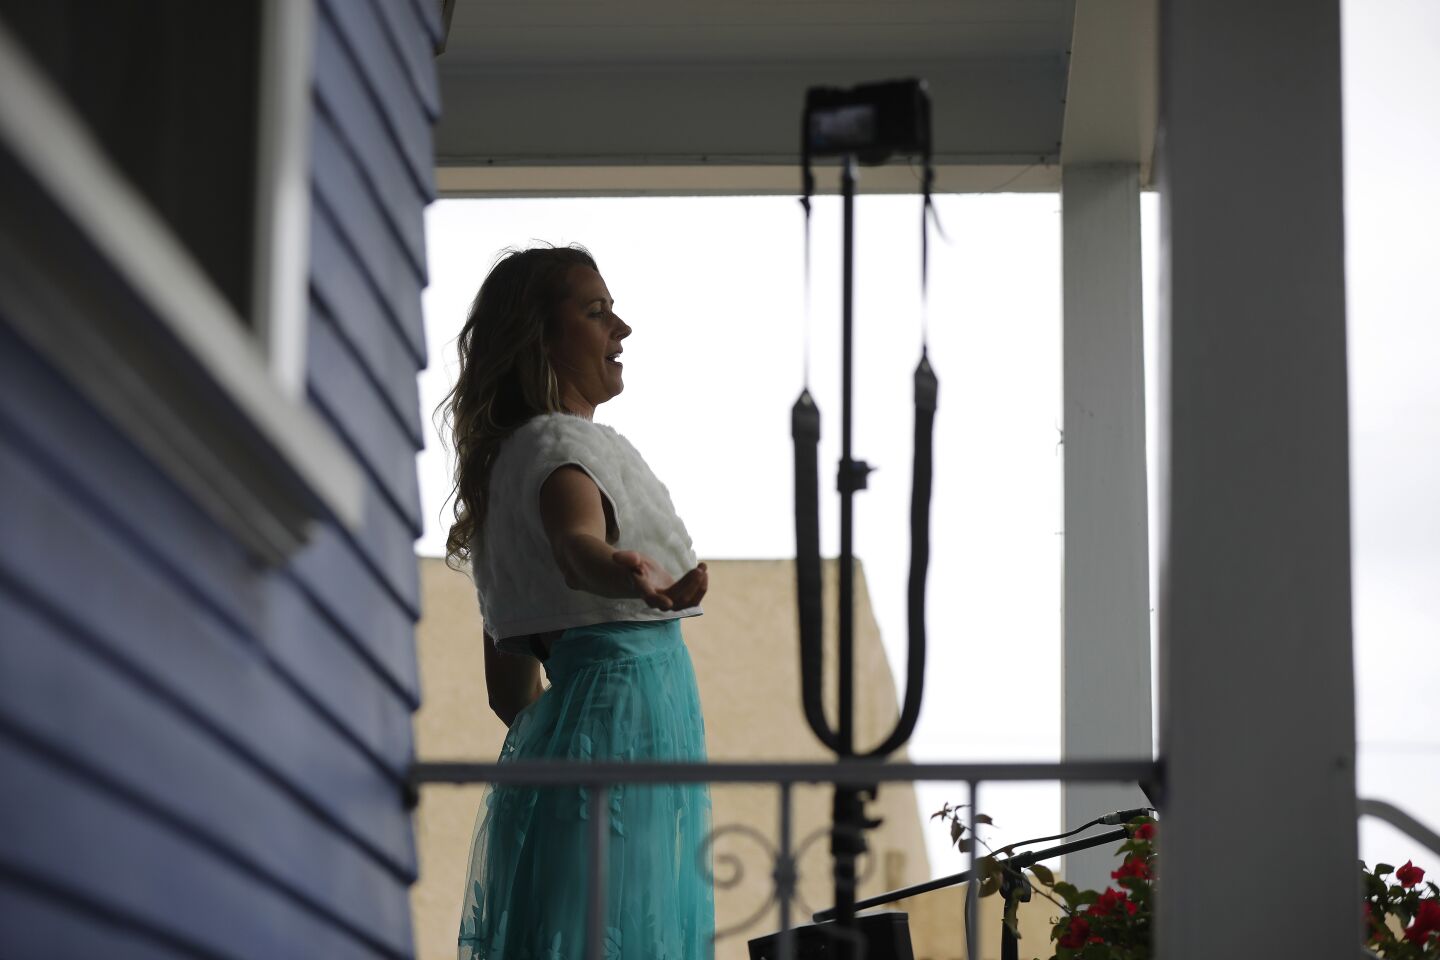 Opera singer Victoria Robertson, a soprano, sings from the porch of her North Park home on April 19, 2020. For the second week in a row, Robertson performed for 15 minutes to a crowd, keeping their distance from each other on the street below.